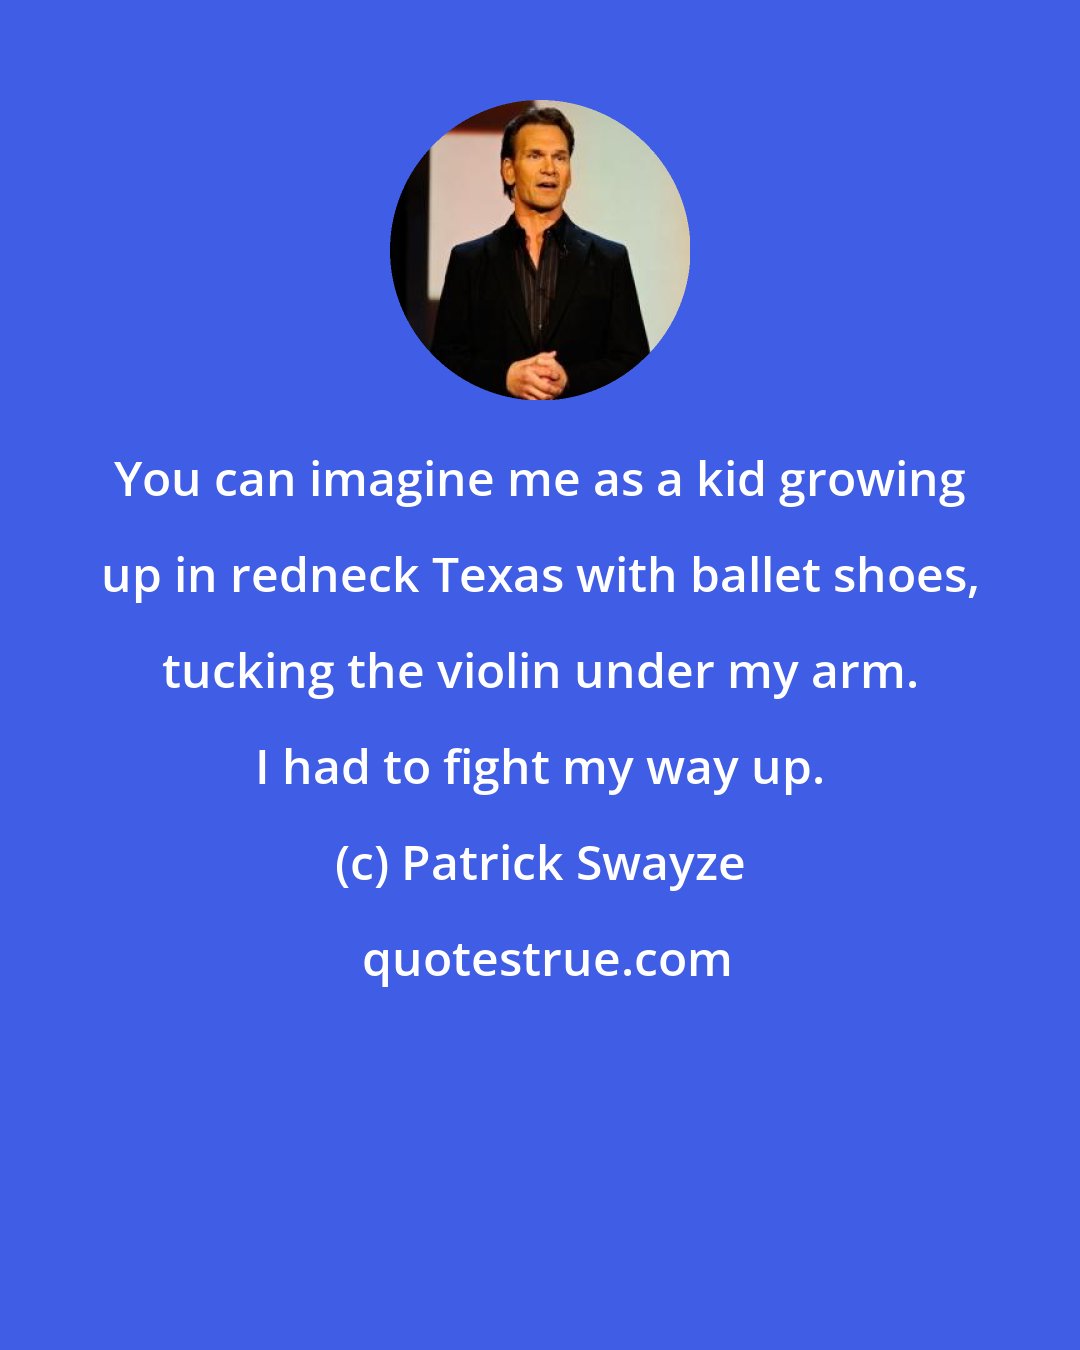 Patrick Swayze: You can imagine me as a kid growing up in redneck Texas with ballet shoes, tucking the violin under my arm. I had to fight my way up.